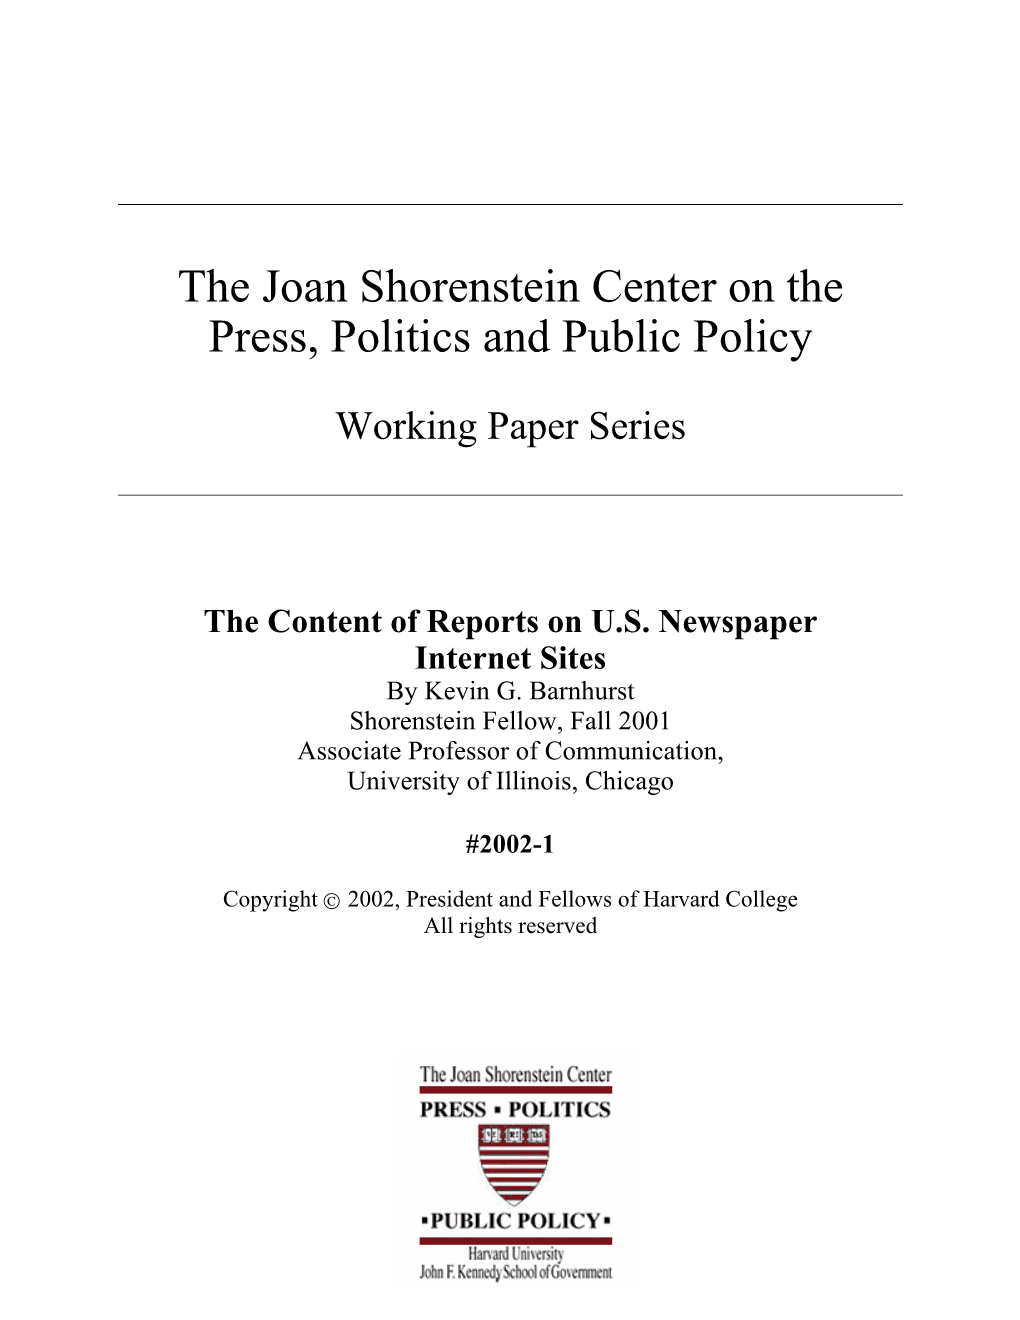 The Content of Reports on U.S. Newspaper Internet Sites by Kevin G